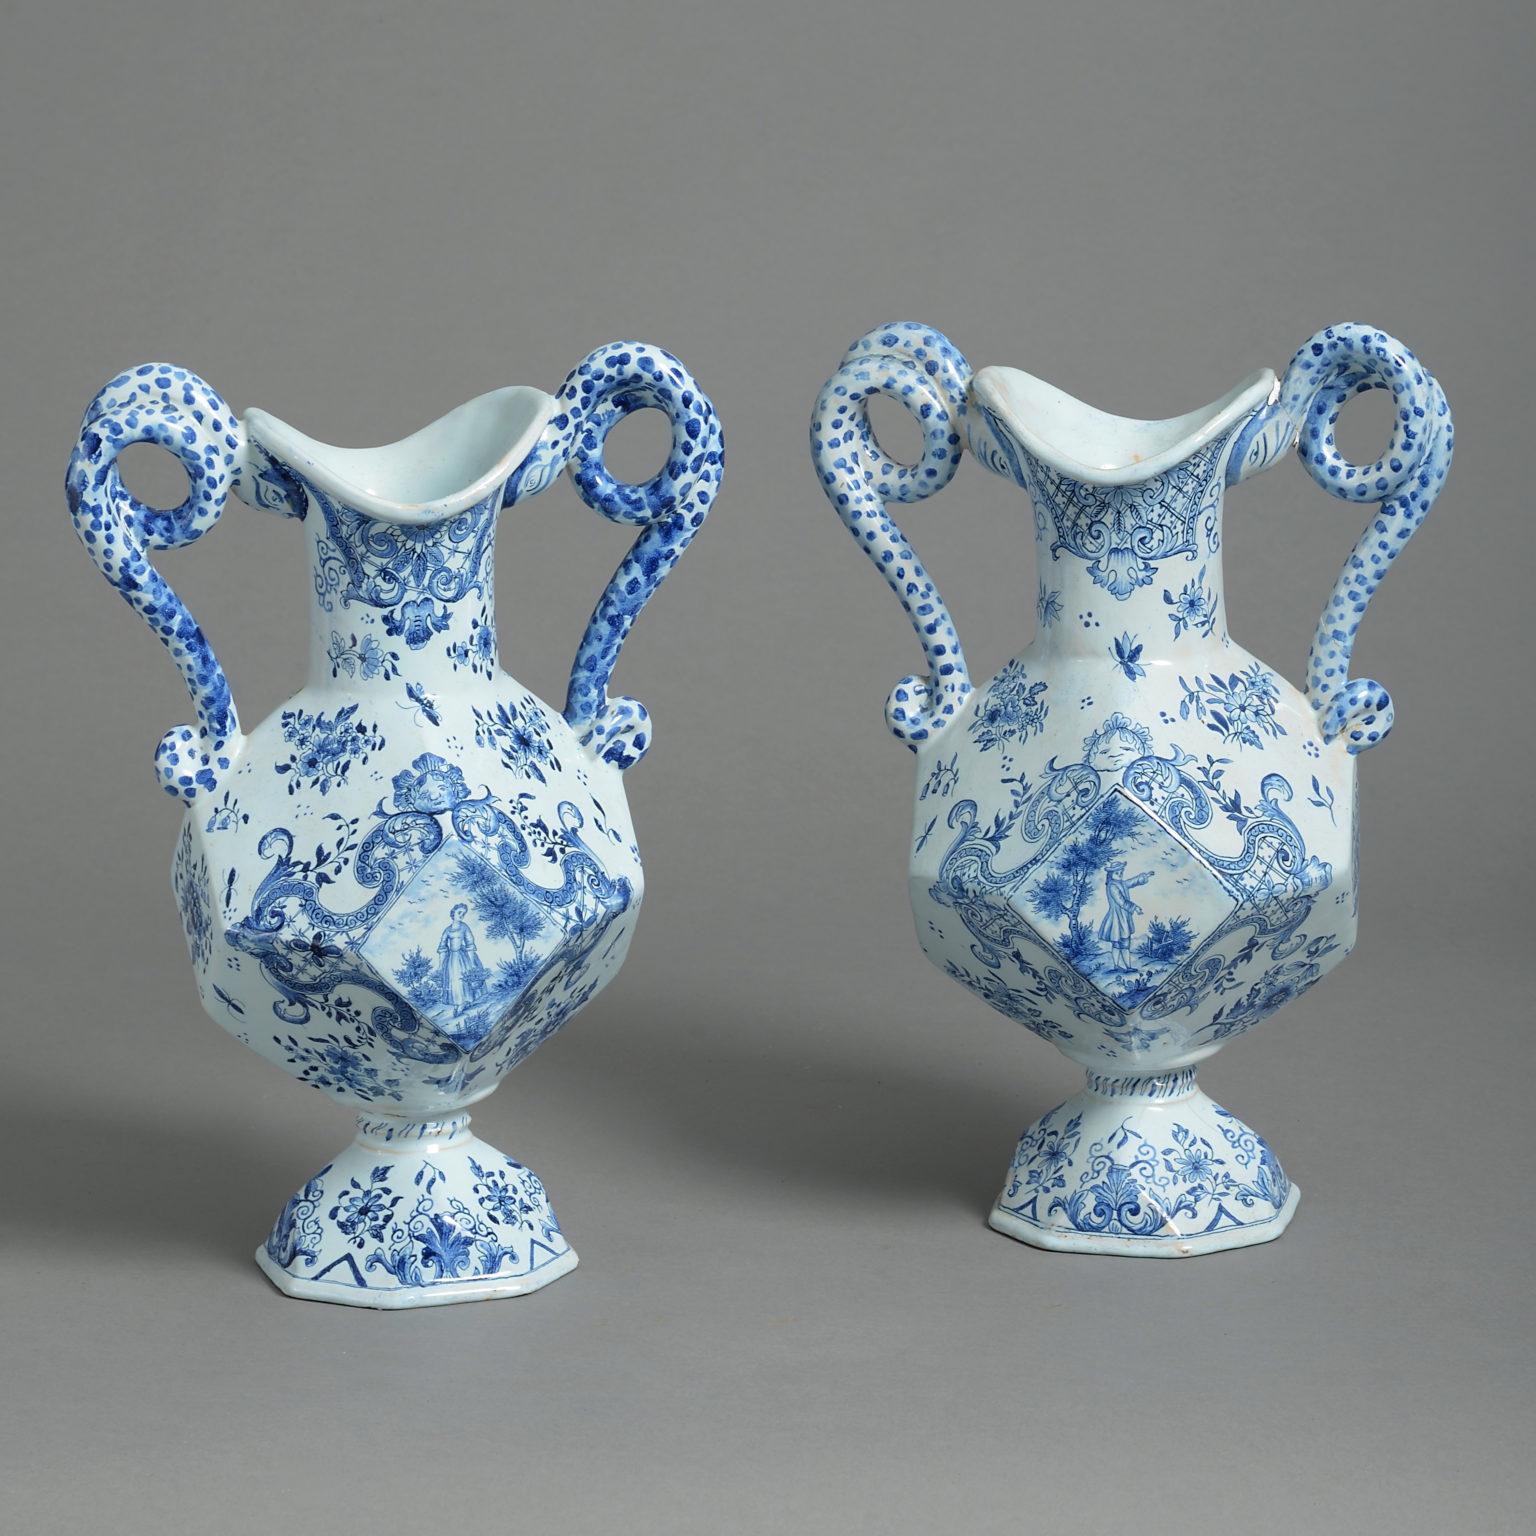 A pair of late 19th century blue and white glazed faience pottery campagna vases, having scrolling handles, the bodies of faceted form and decorated with figurative scenes and armorials.